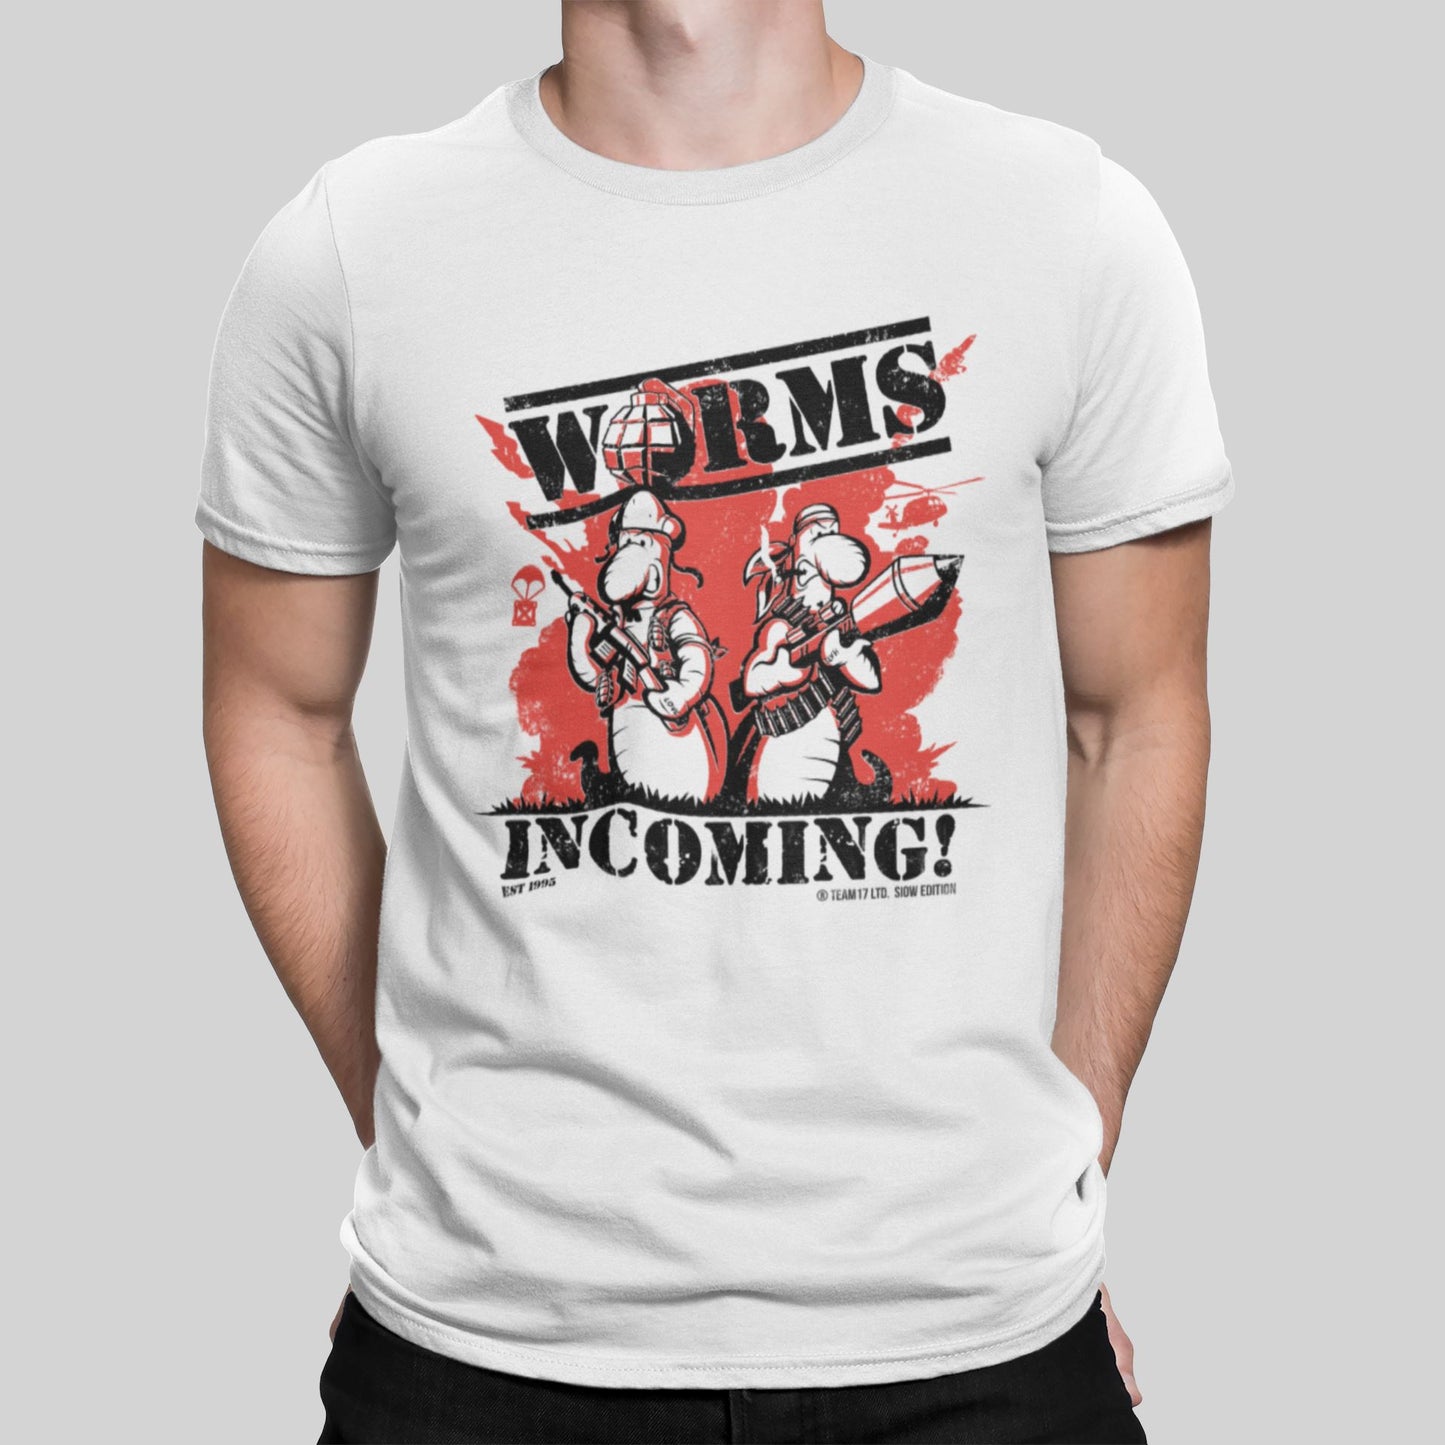 WORMS Incoming Retro Gaming T-Shirt (SIOW Edition) T-Shirt Seven Squared Small 34-36" White 